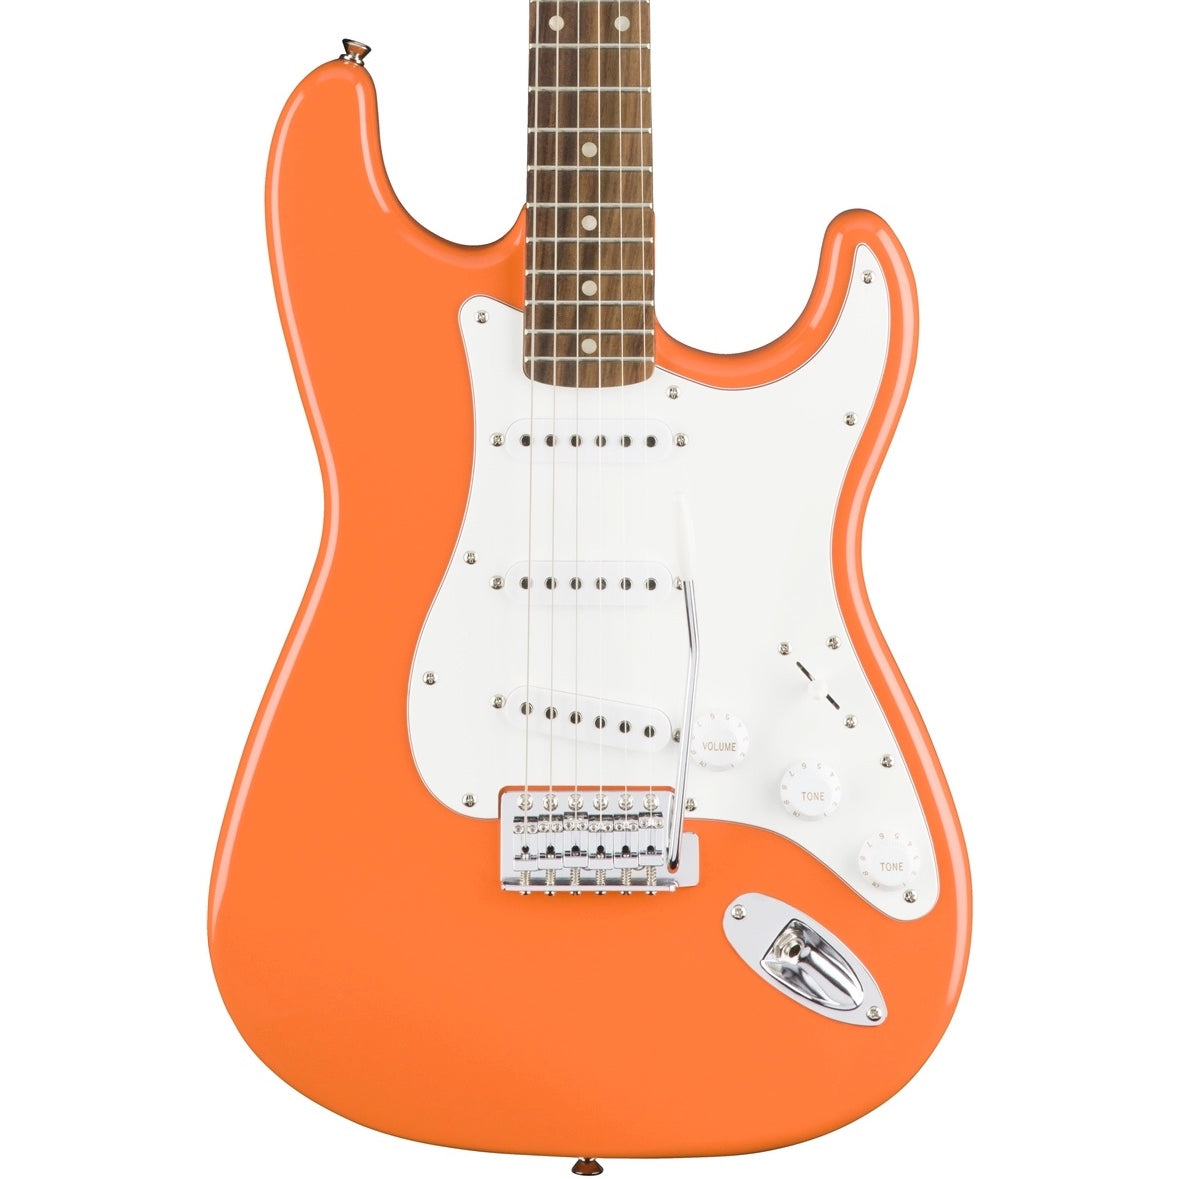 Fender Squier Affinity Series Stratocaster Competition Orange | Music Experience | Shop Online | South Africa